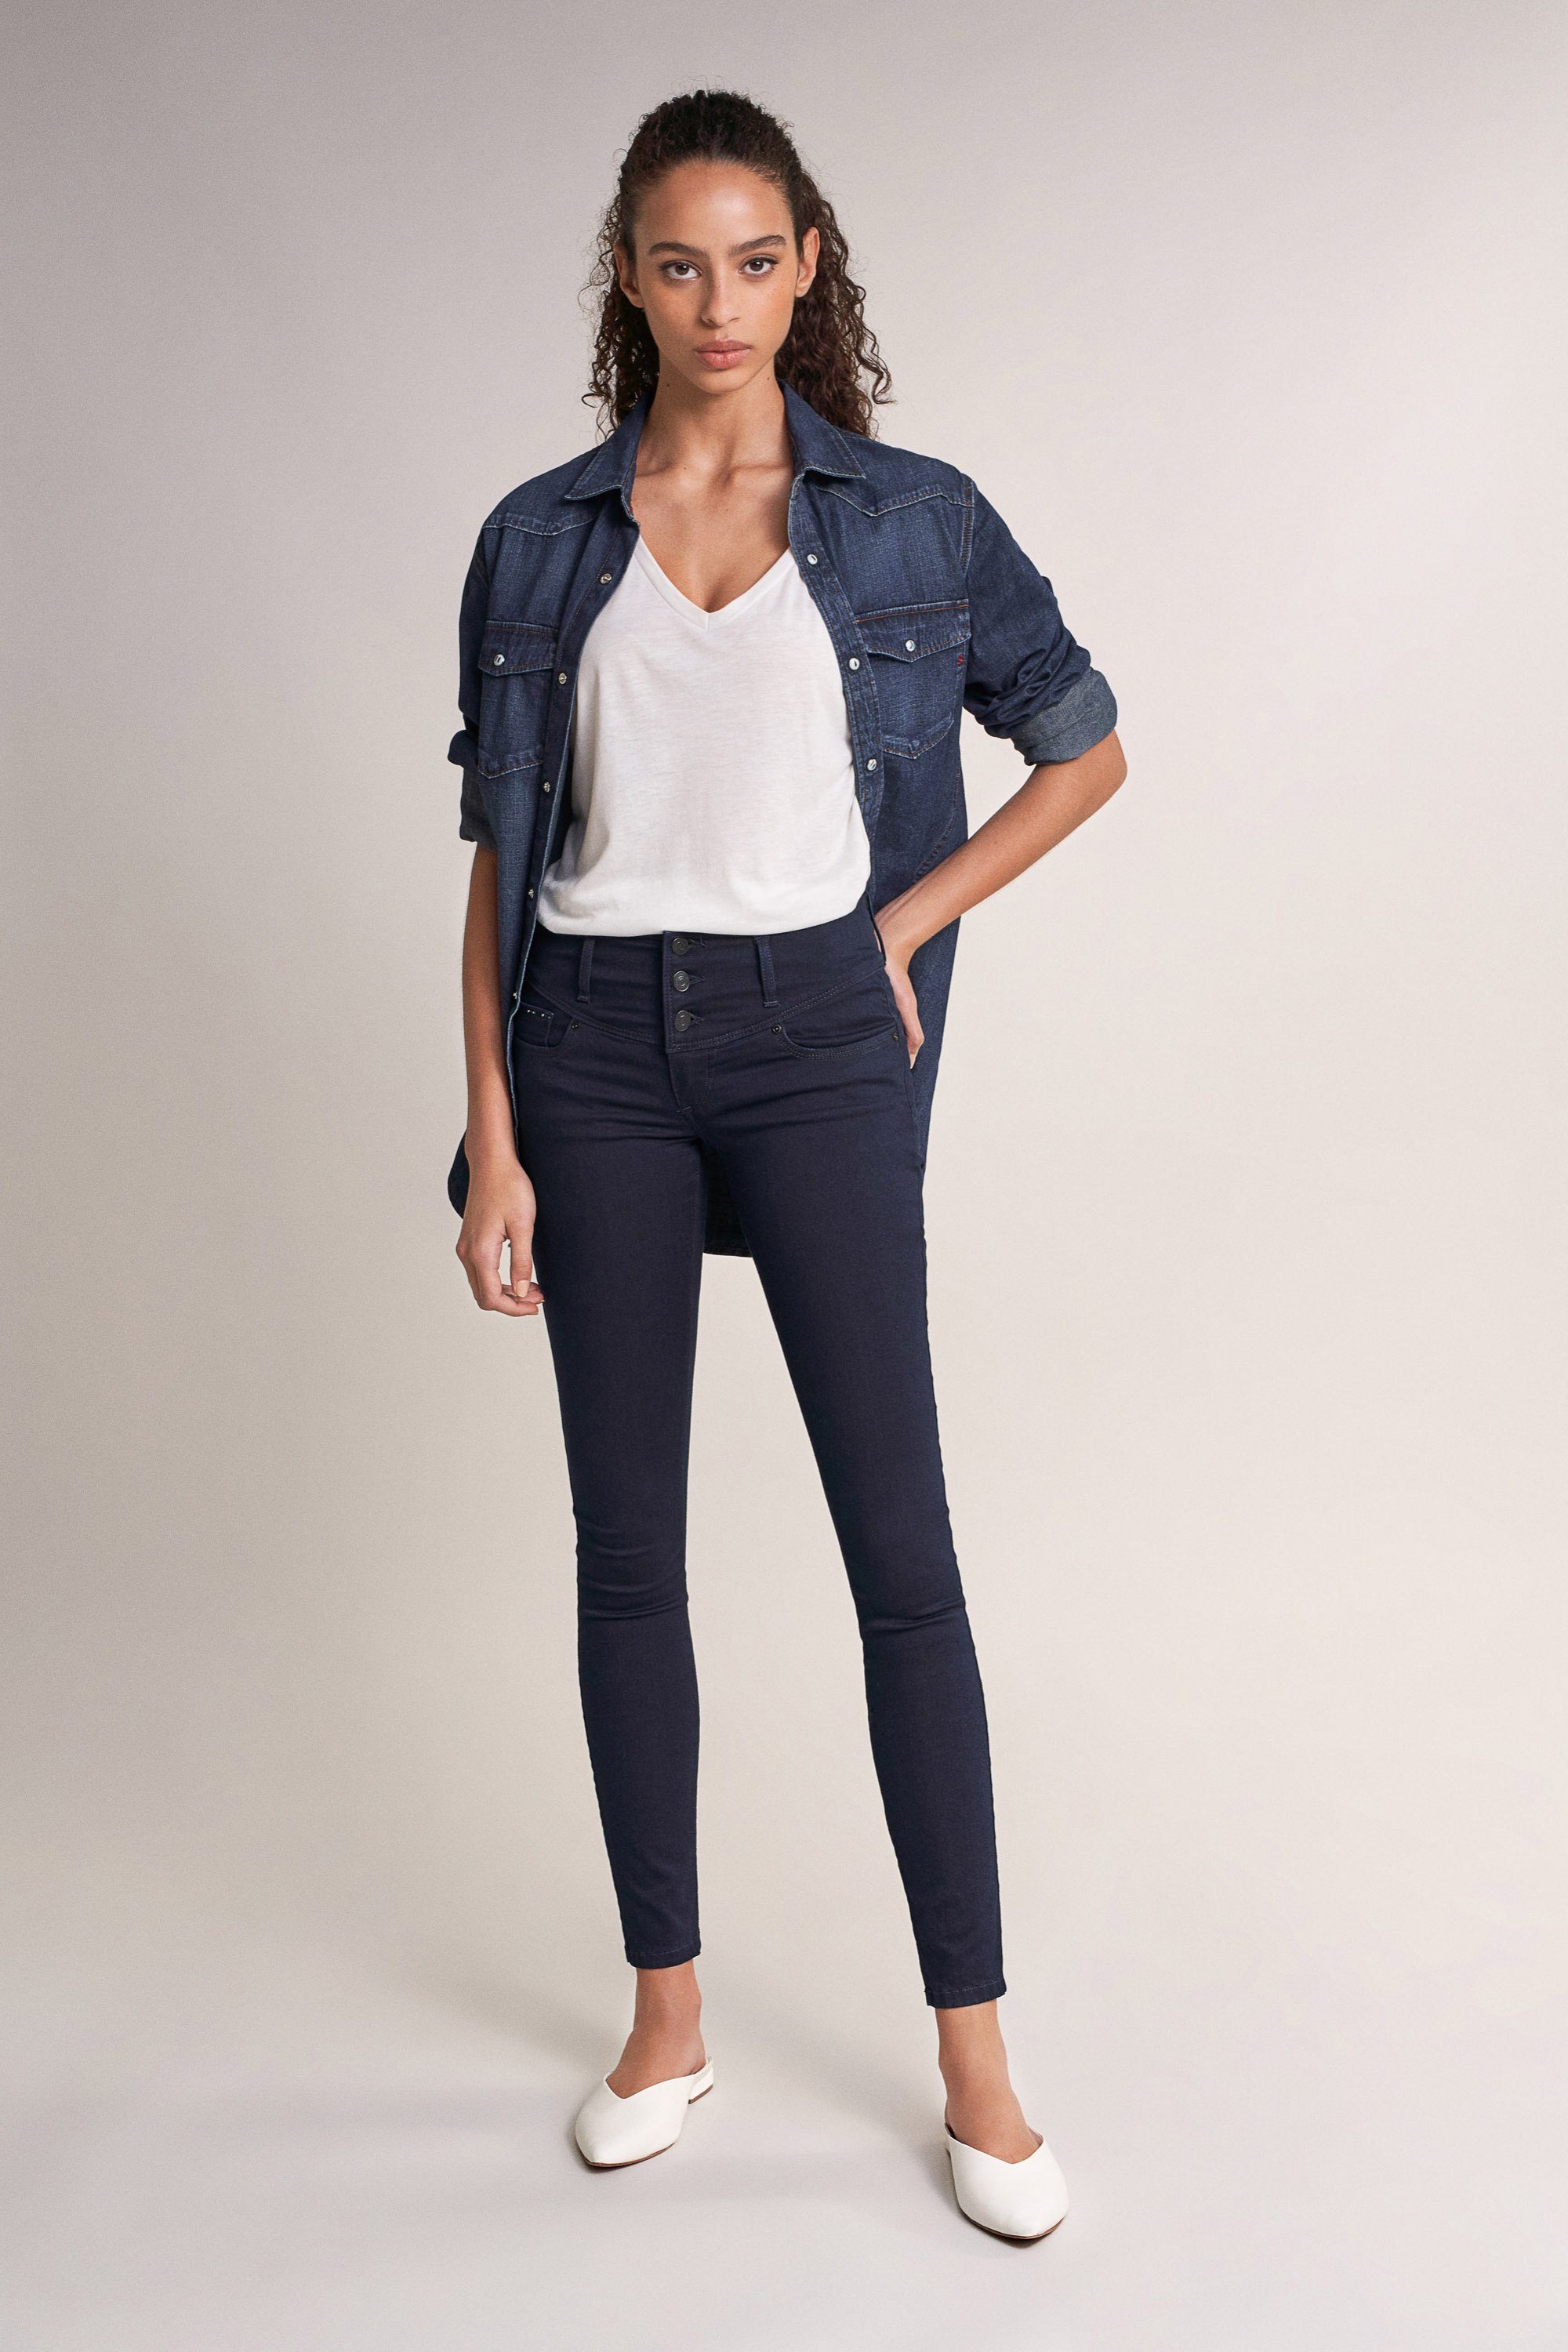 Salsa Stretch-Jeans touch SALSA 124254 MYSTERY dark blue UP coating SKINNY soft PUSH JEANS